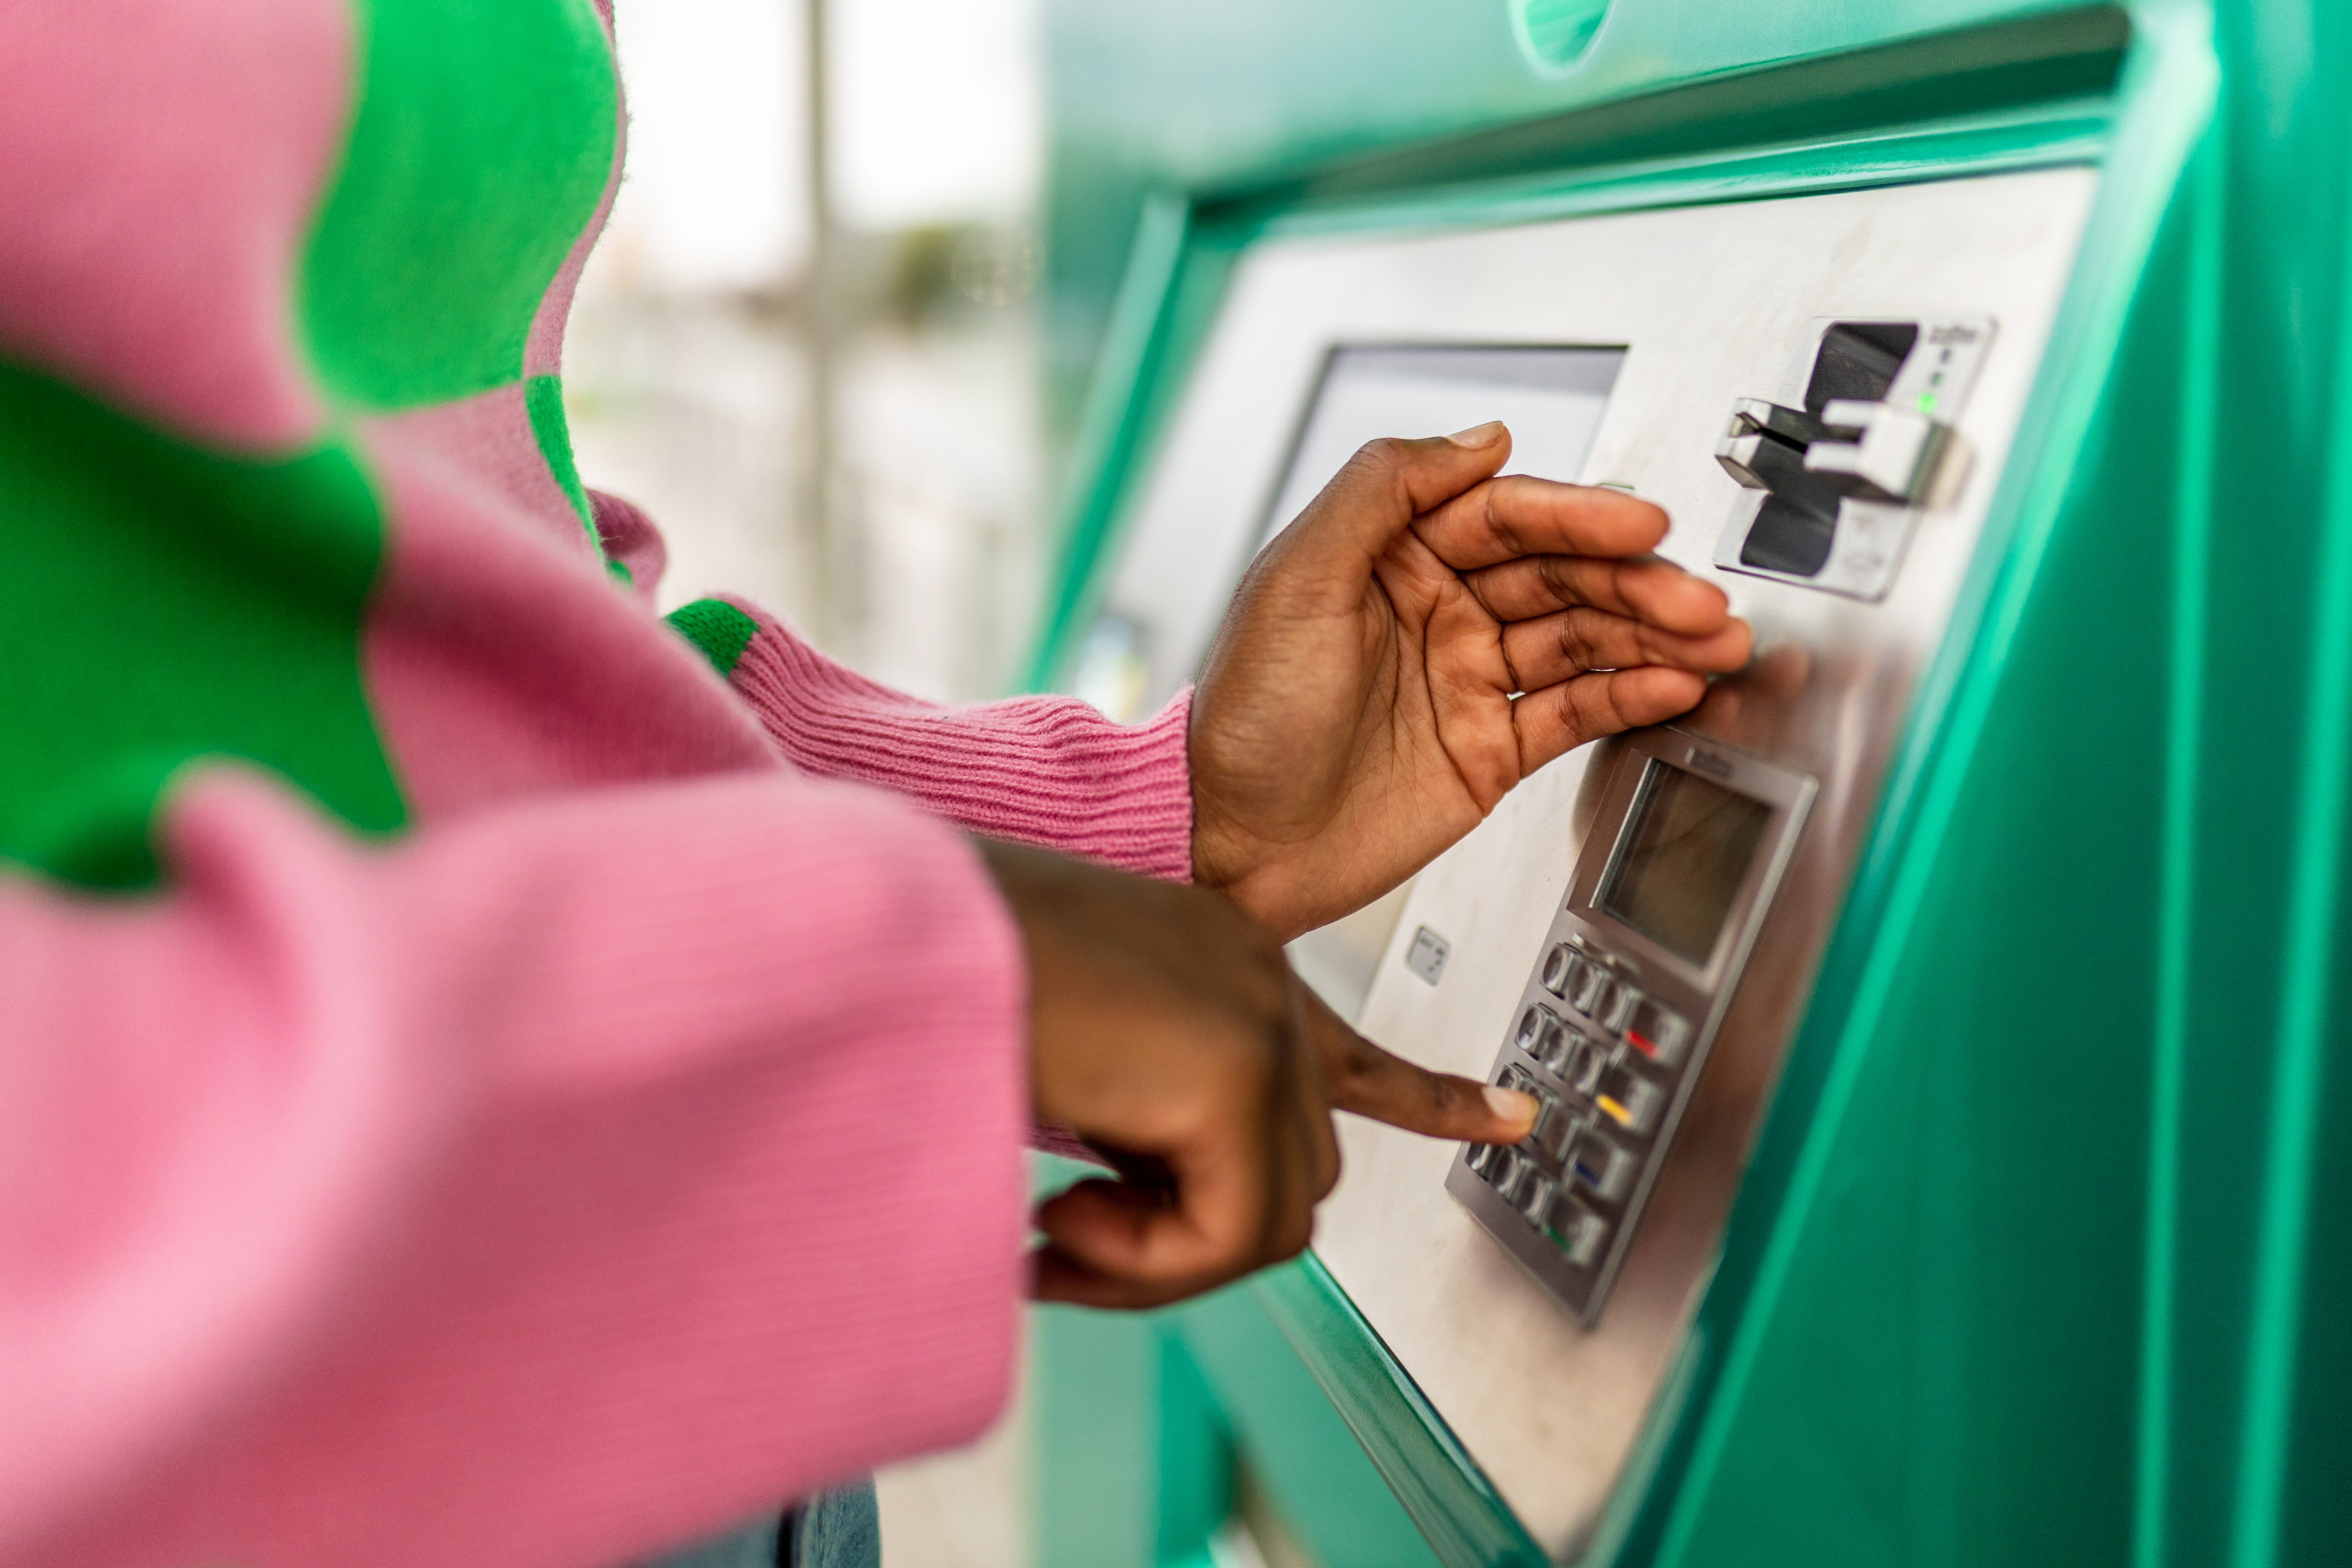 a woman punches her PIN into an ATM